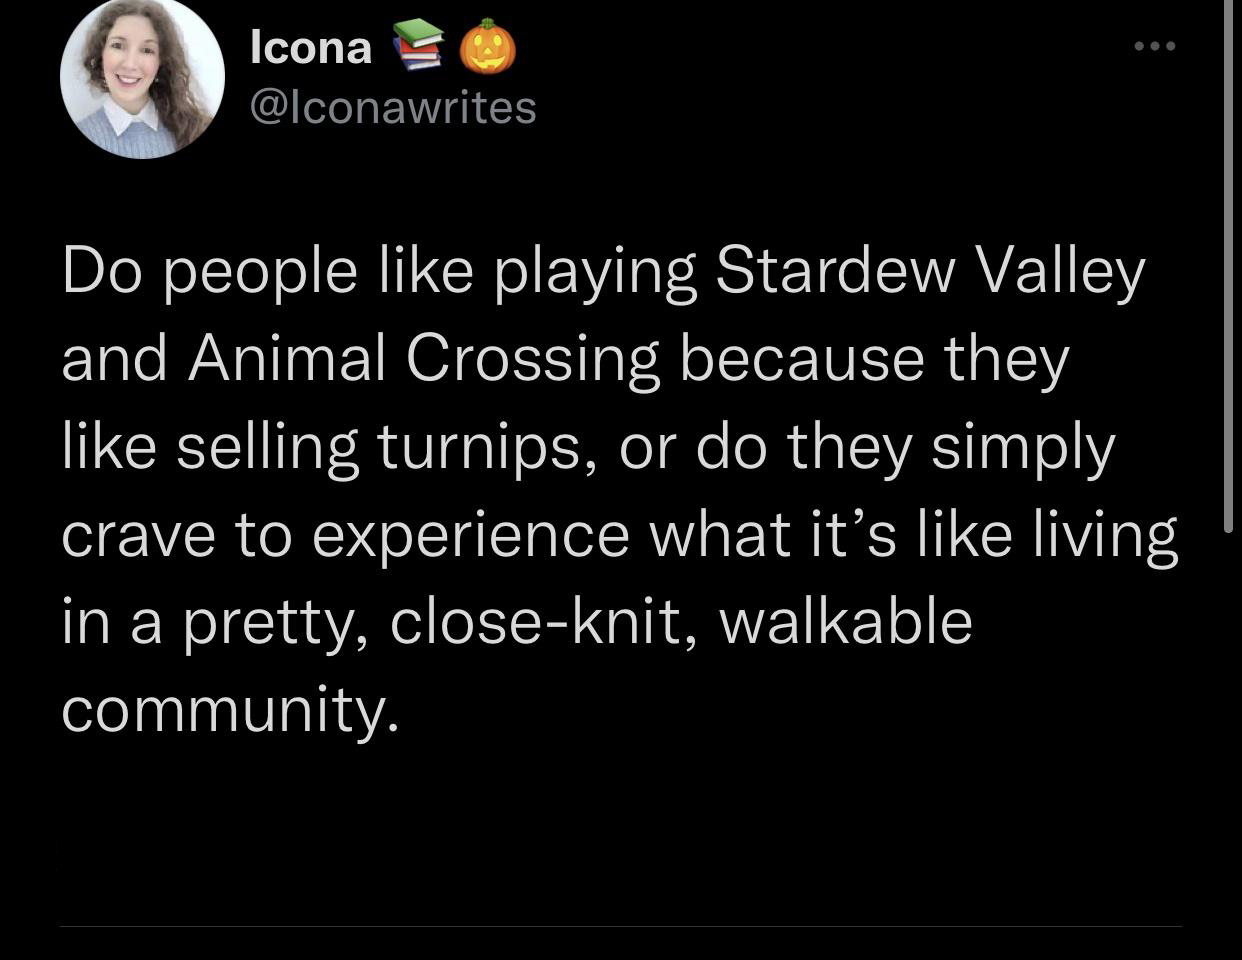 scorpio opening up - Icona Do people playing Stardew Valley and Animal Crossing because they selling turnips, or do they simply crave to experience what it's living in a pretty, closeknit, walkable community.